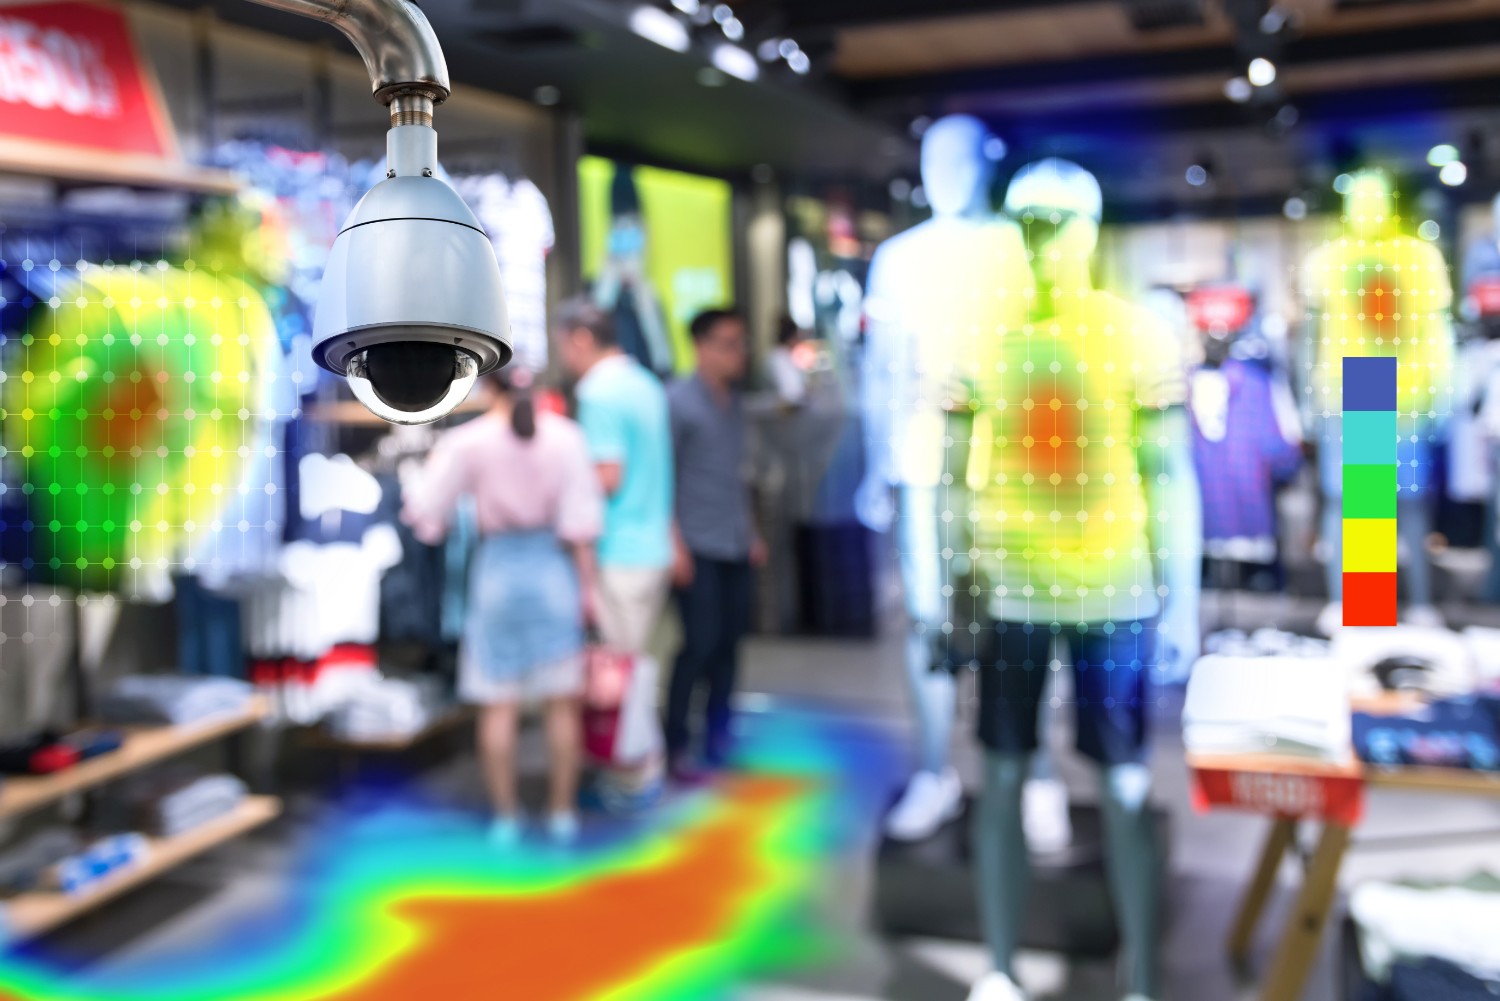 dome CCTV camera inside a clothing store with multi-coloured spots